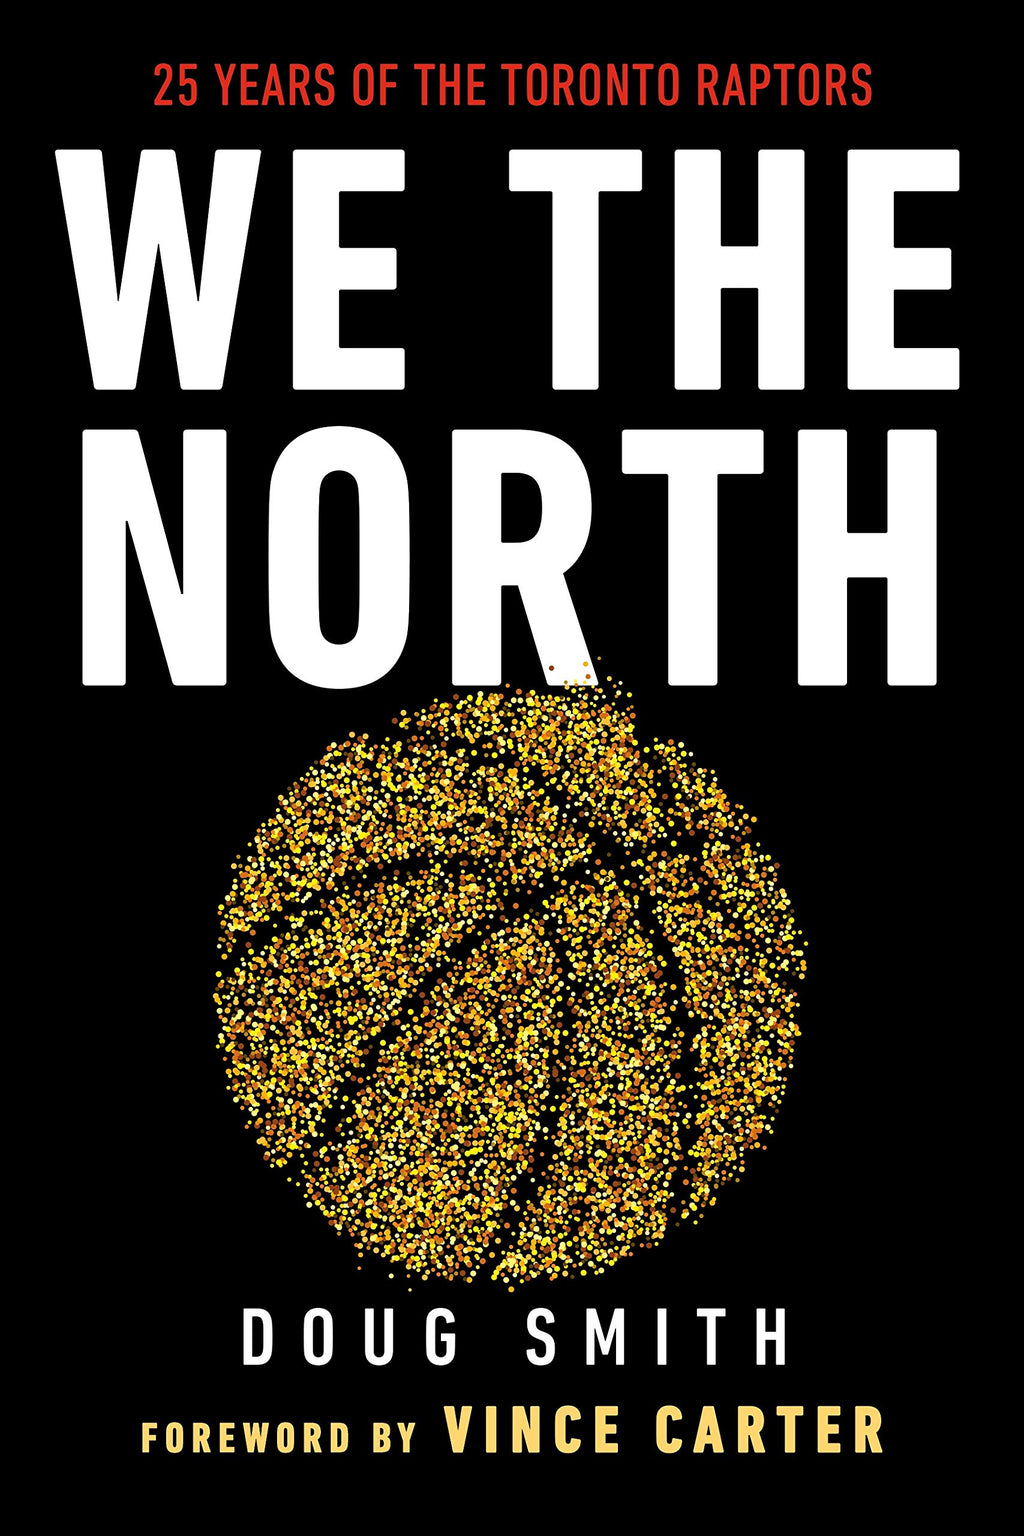 We the North: 25 Years of the Toronto Raptors Hardcover written by Doug Smith, Vince Carter (Foreword) - Best Book Store